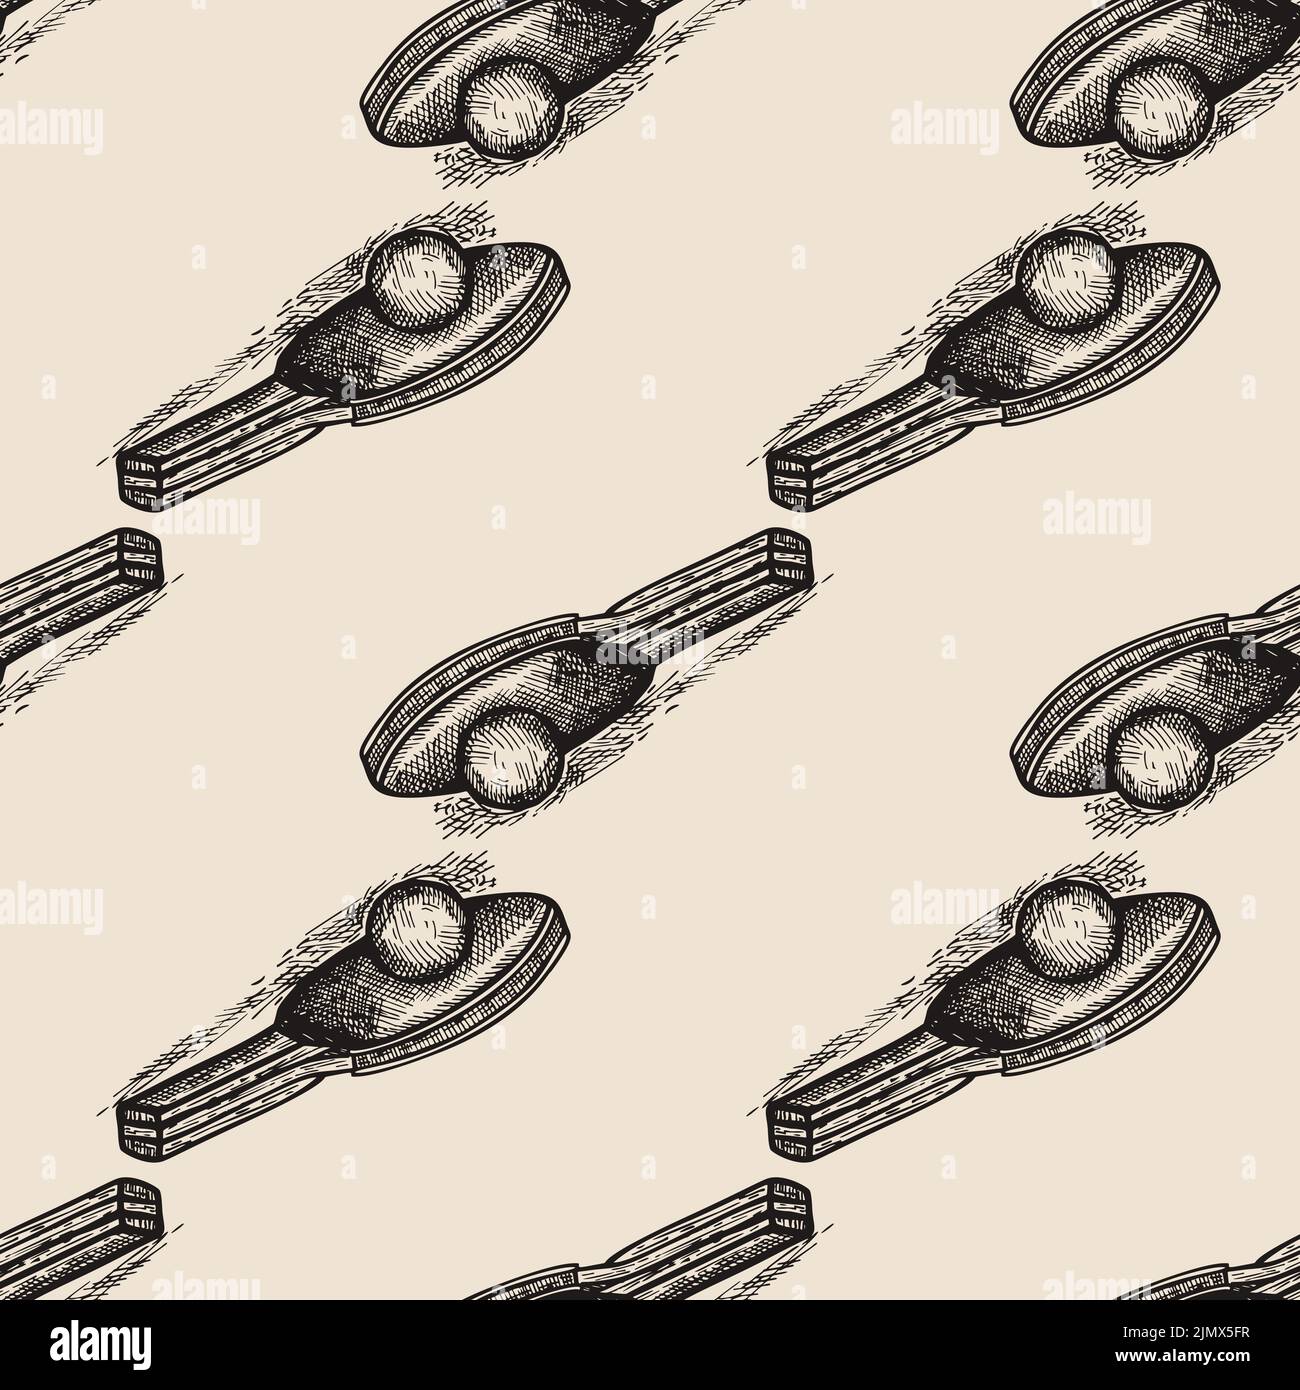 Ping pong racket engraved seamless pattern. Vintage sport elements in hand drawn style. Sketch texture for fabric, wallpaper, textile, print, title, w Stock Vector